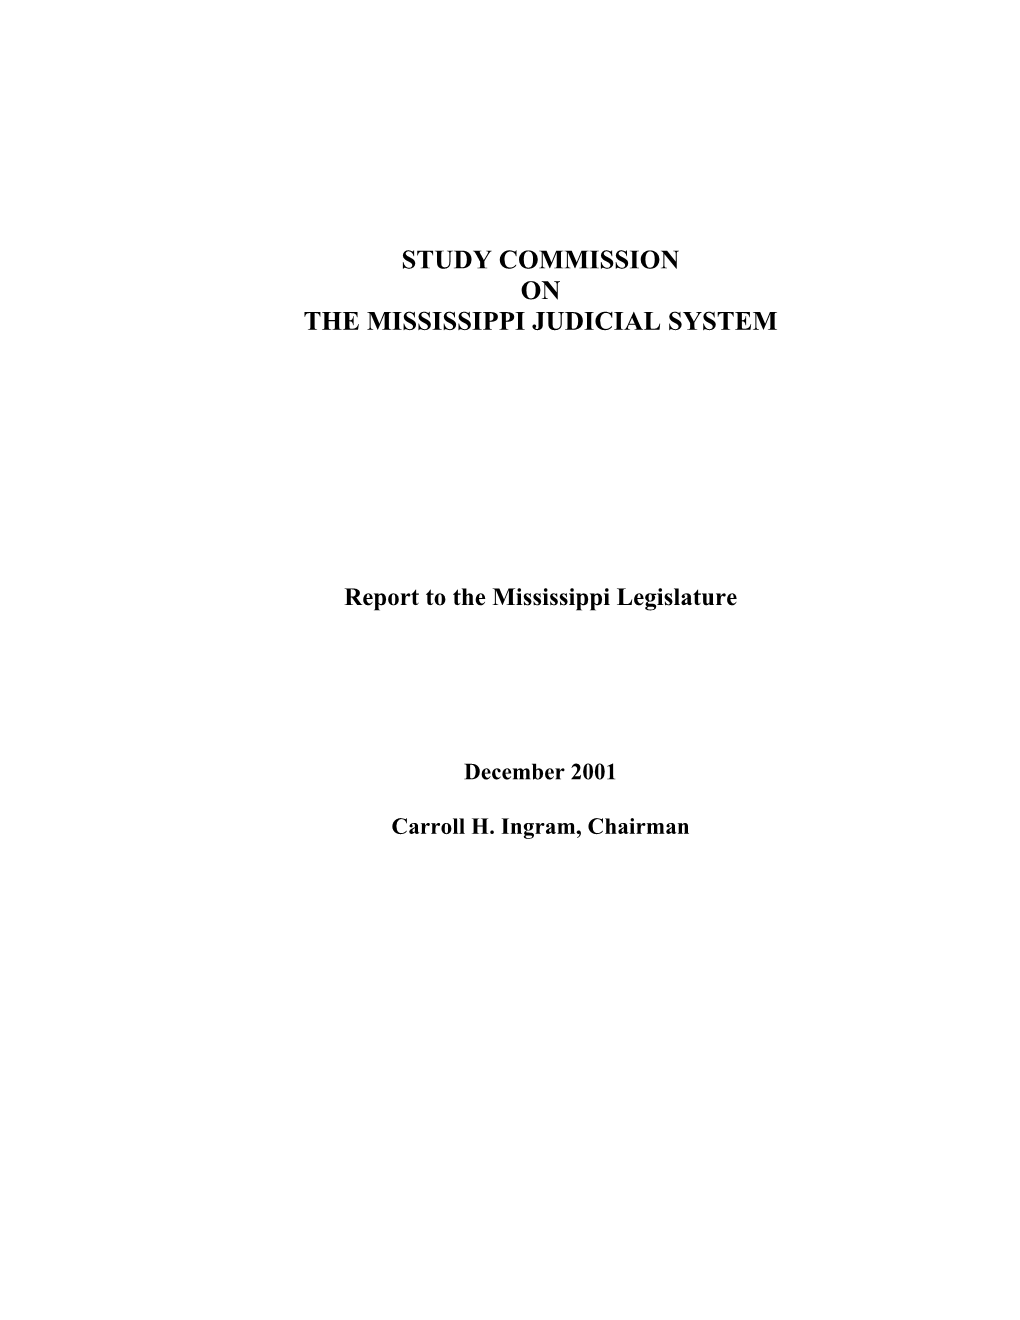 Study Commission on the Mississippi Judicial System